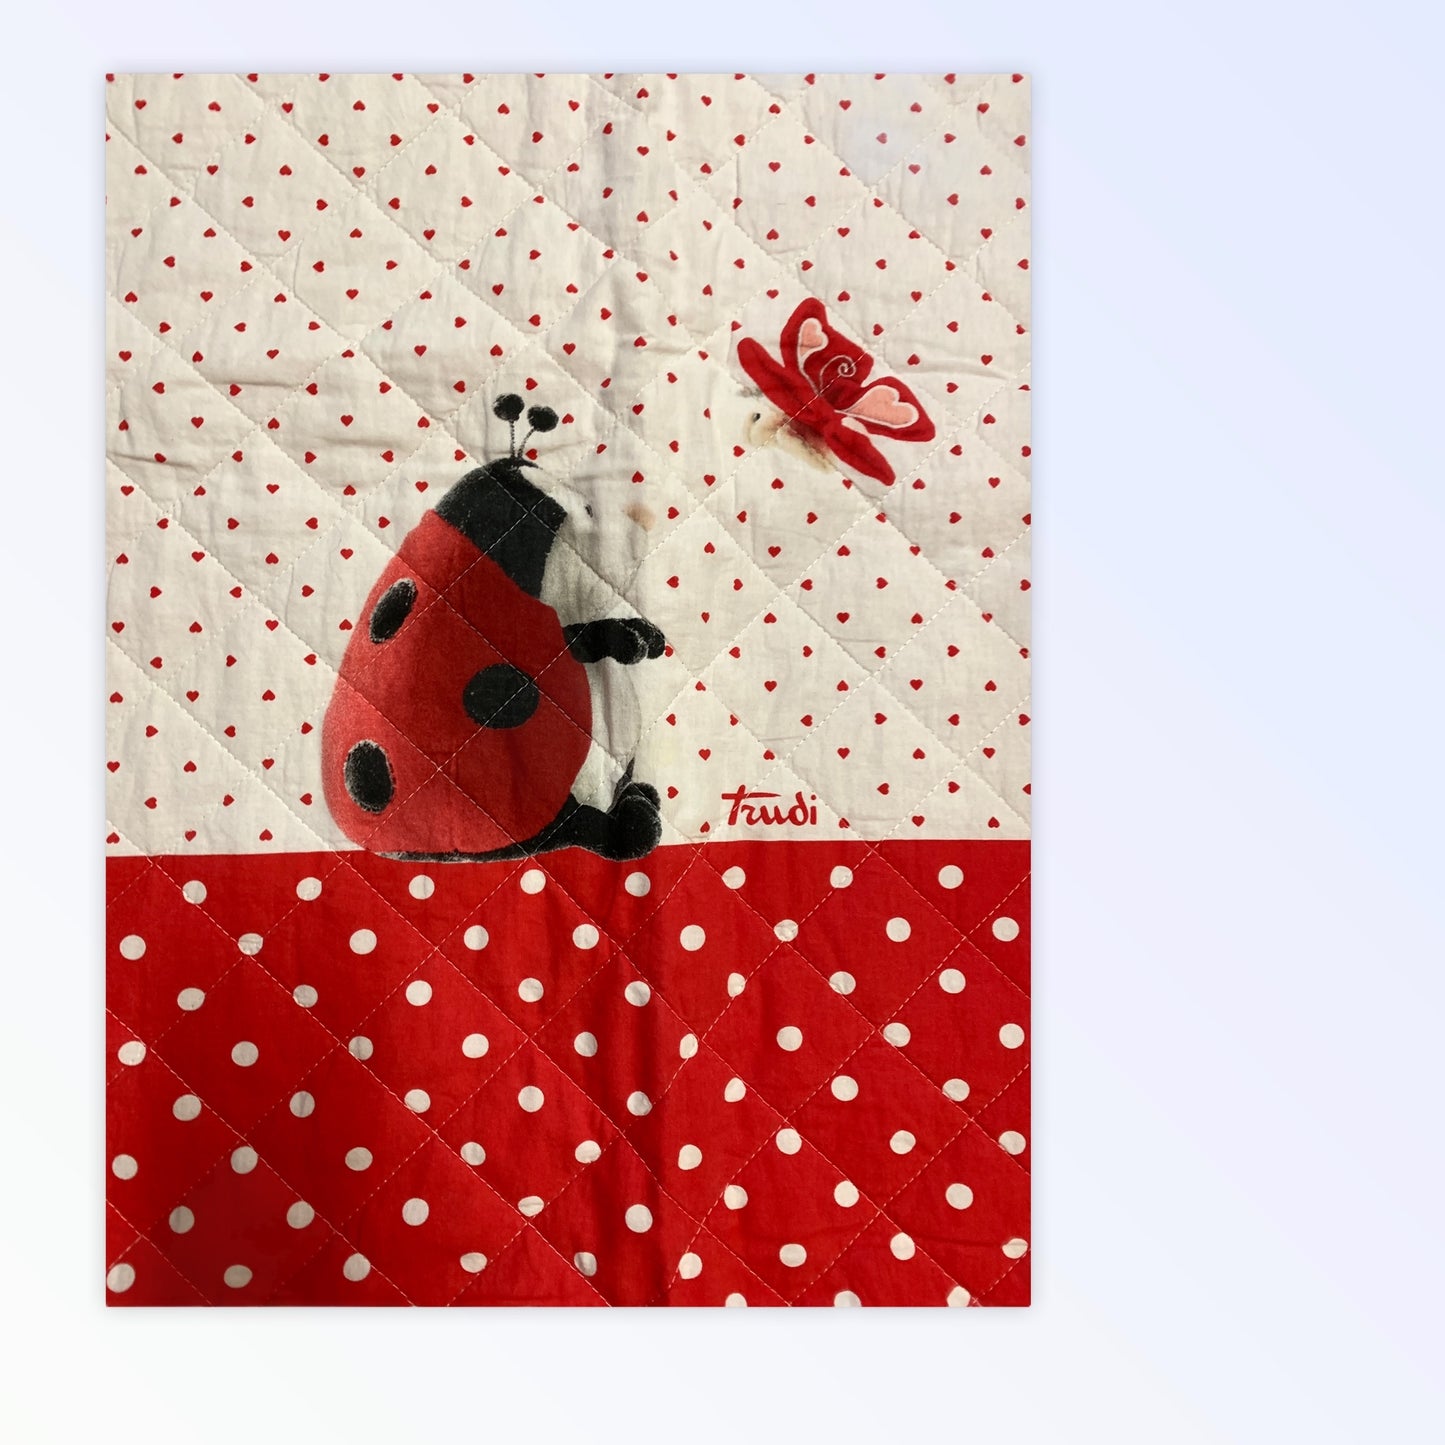 Trudi light quilted bedspread with ladybug